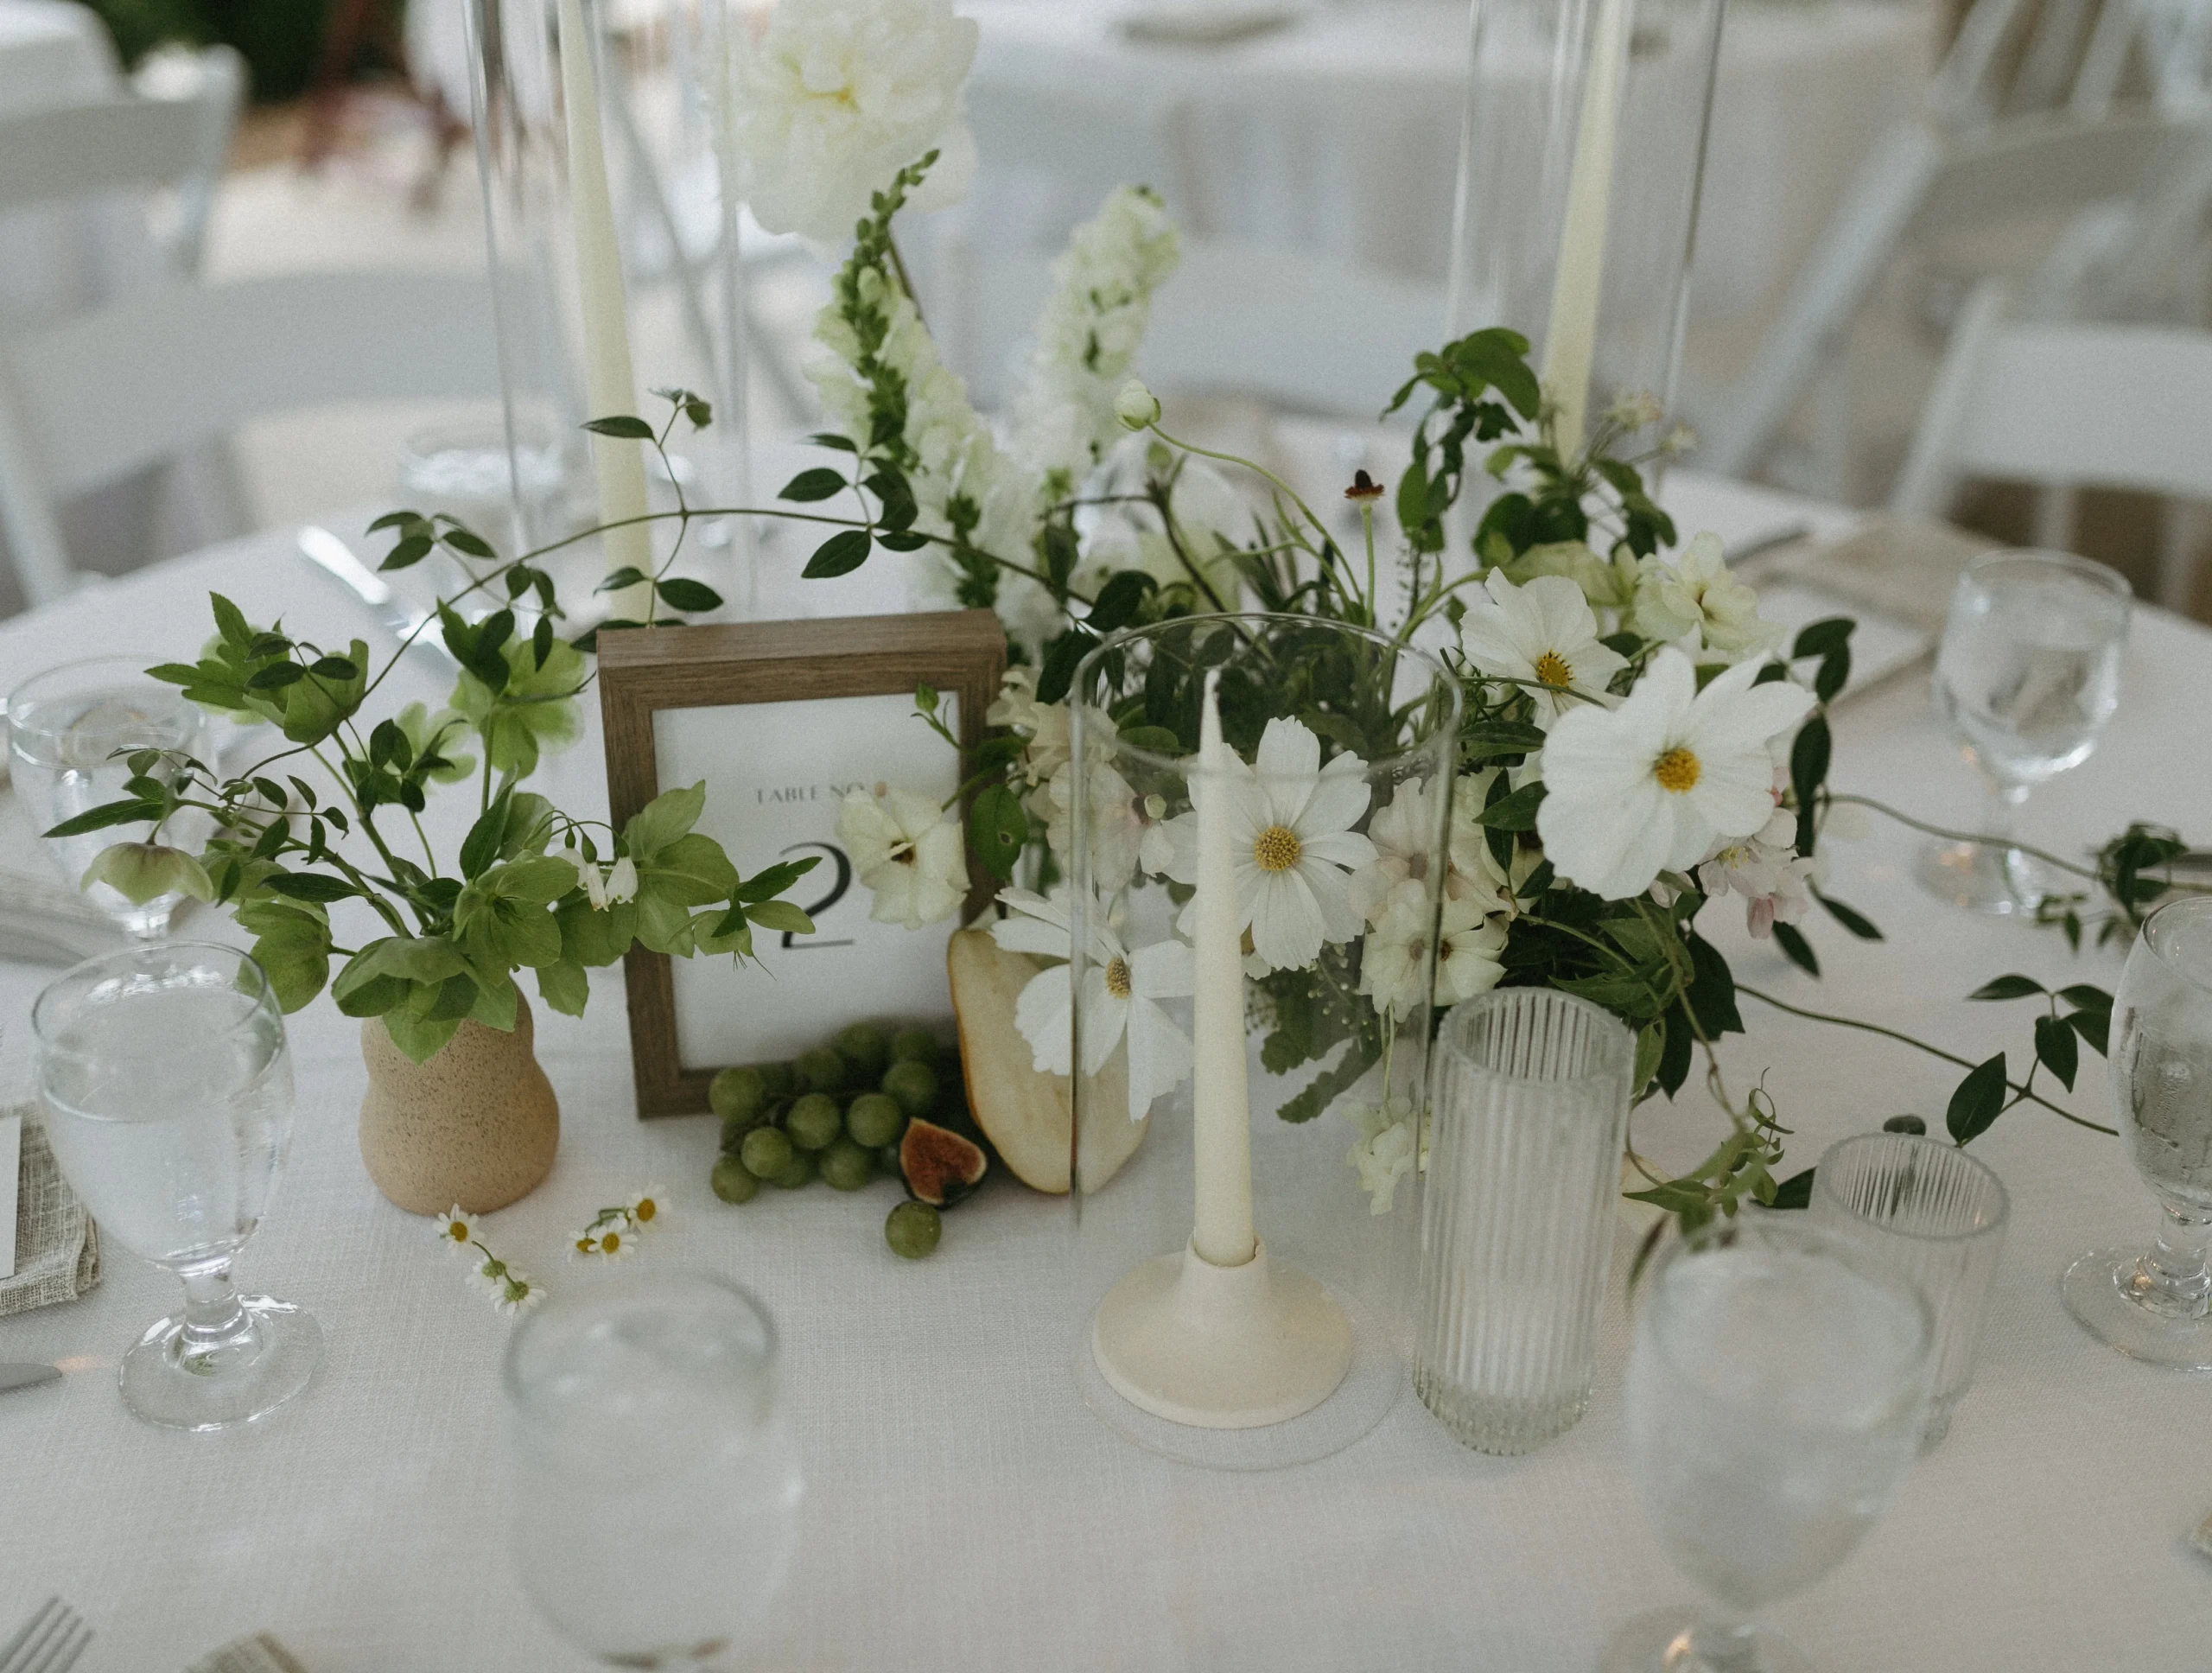 table set up with various green and white plants